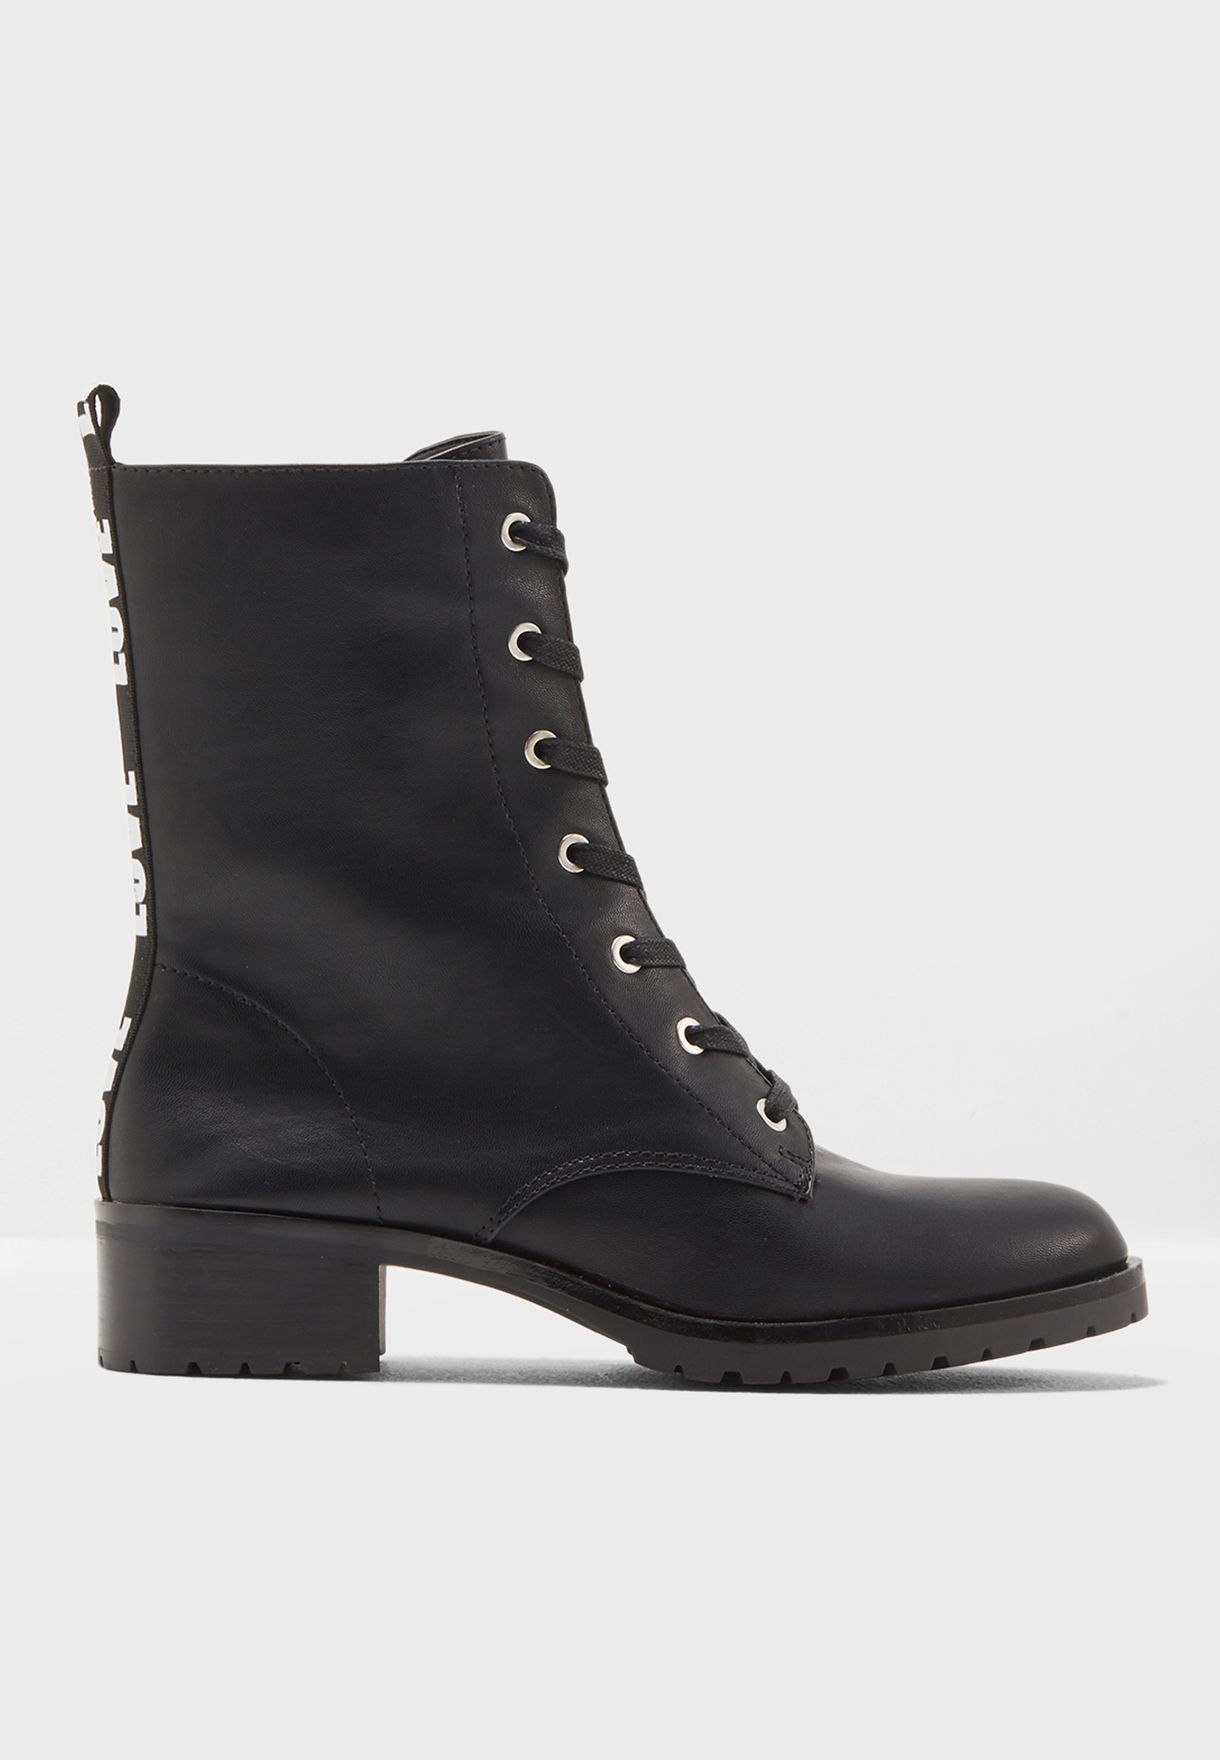 where to buy cheap combat boots